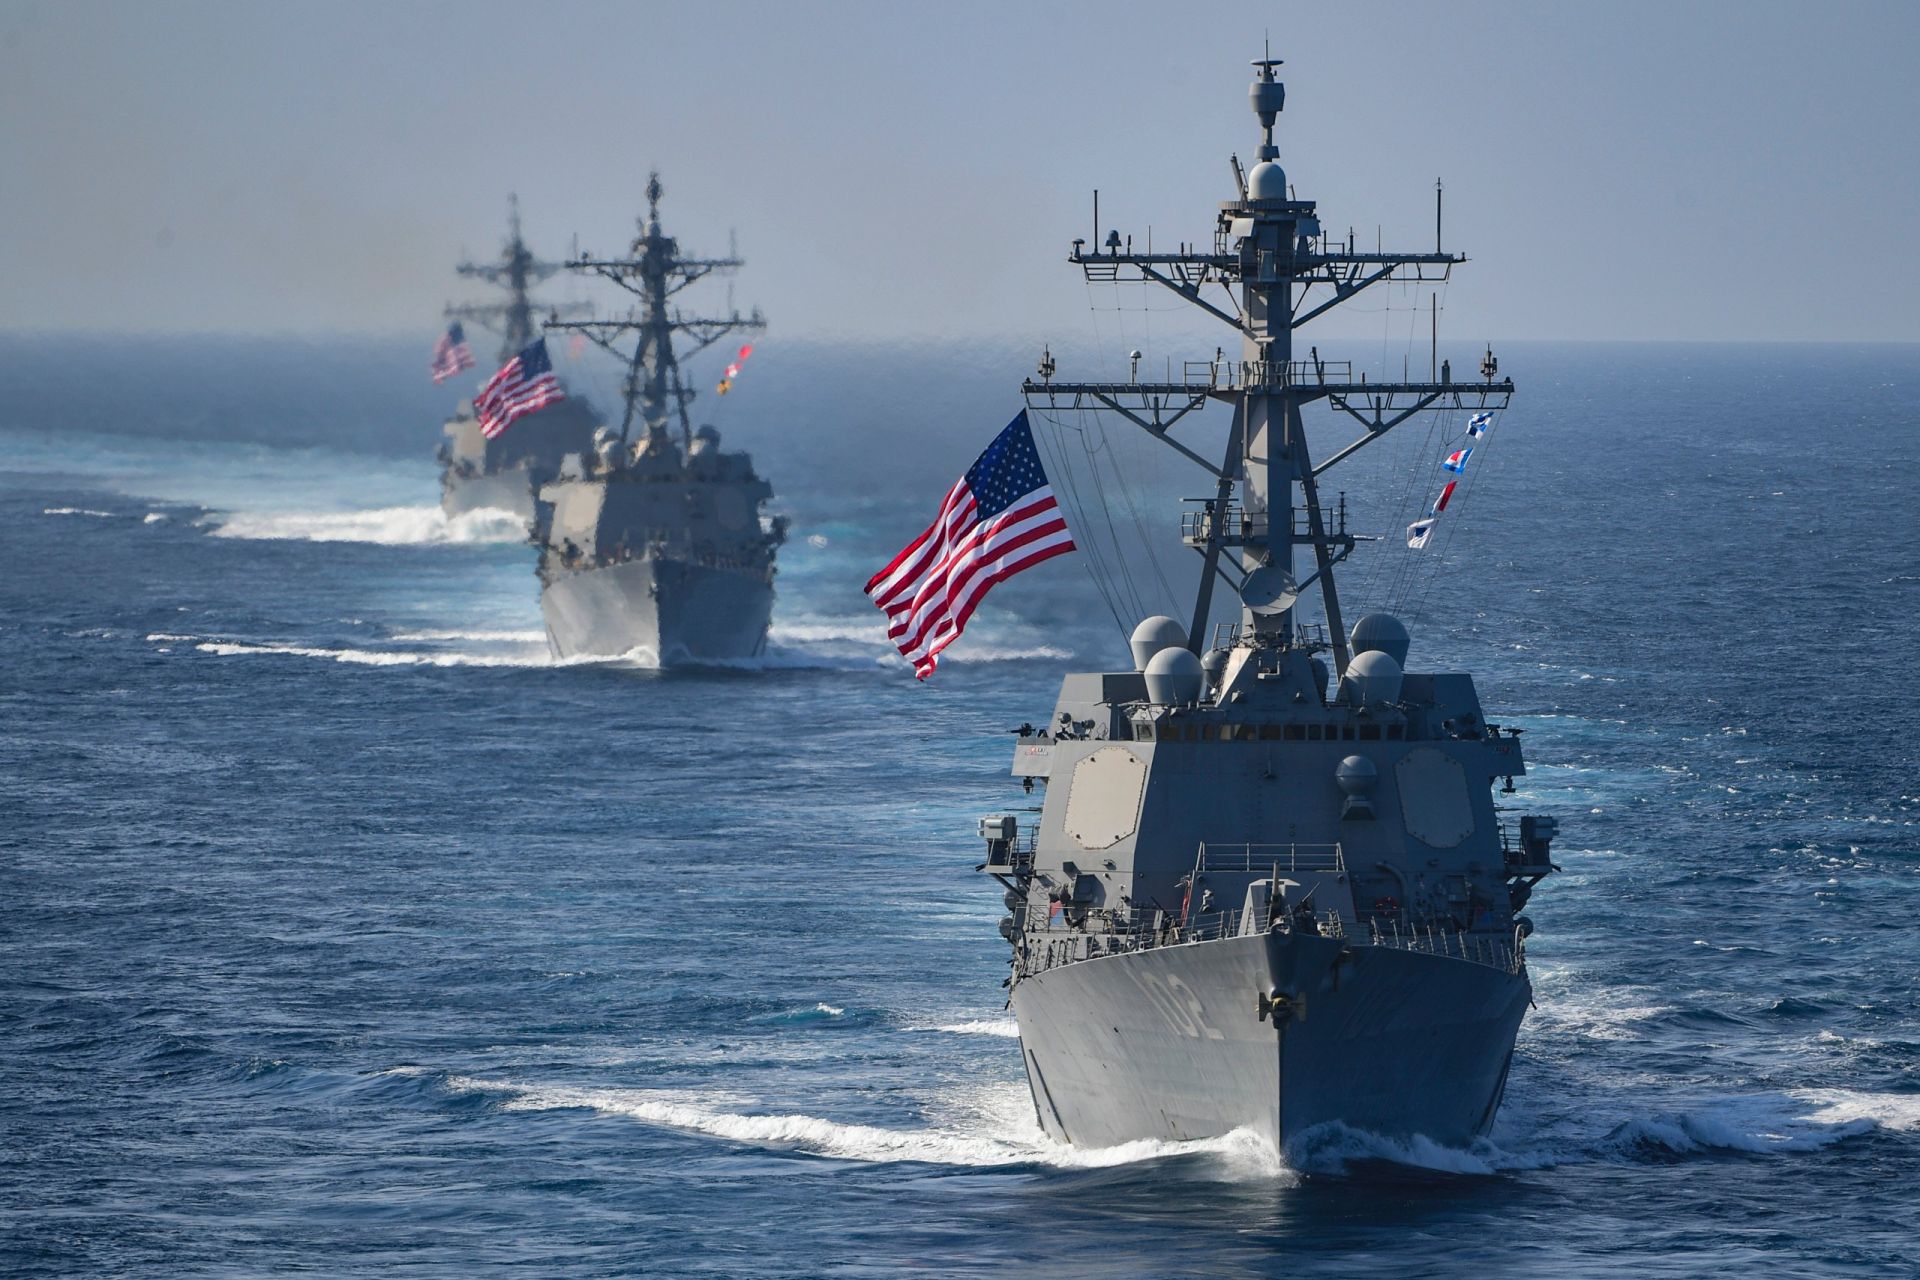 US Navy ships in Barents Sea near Russia, 1st time since 1980s